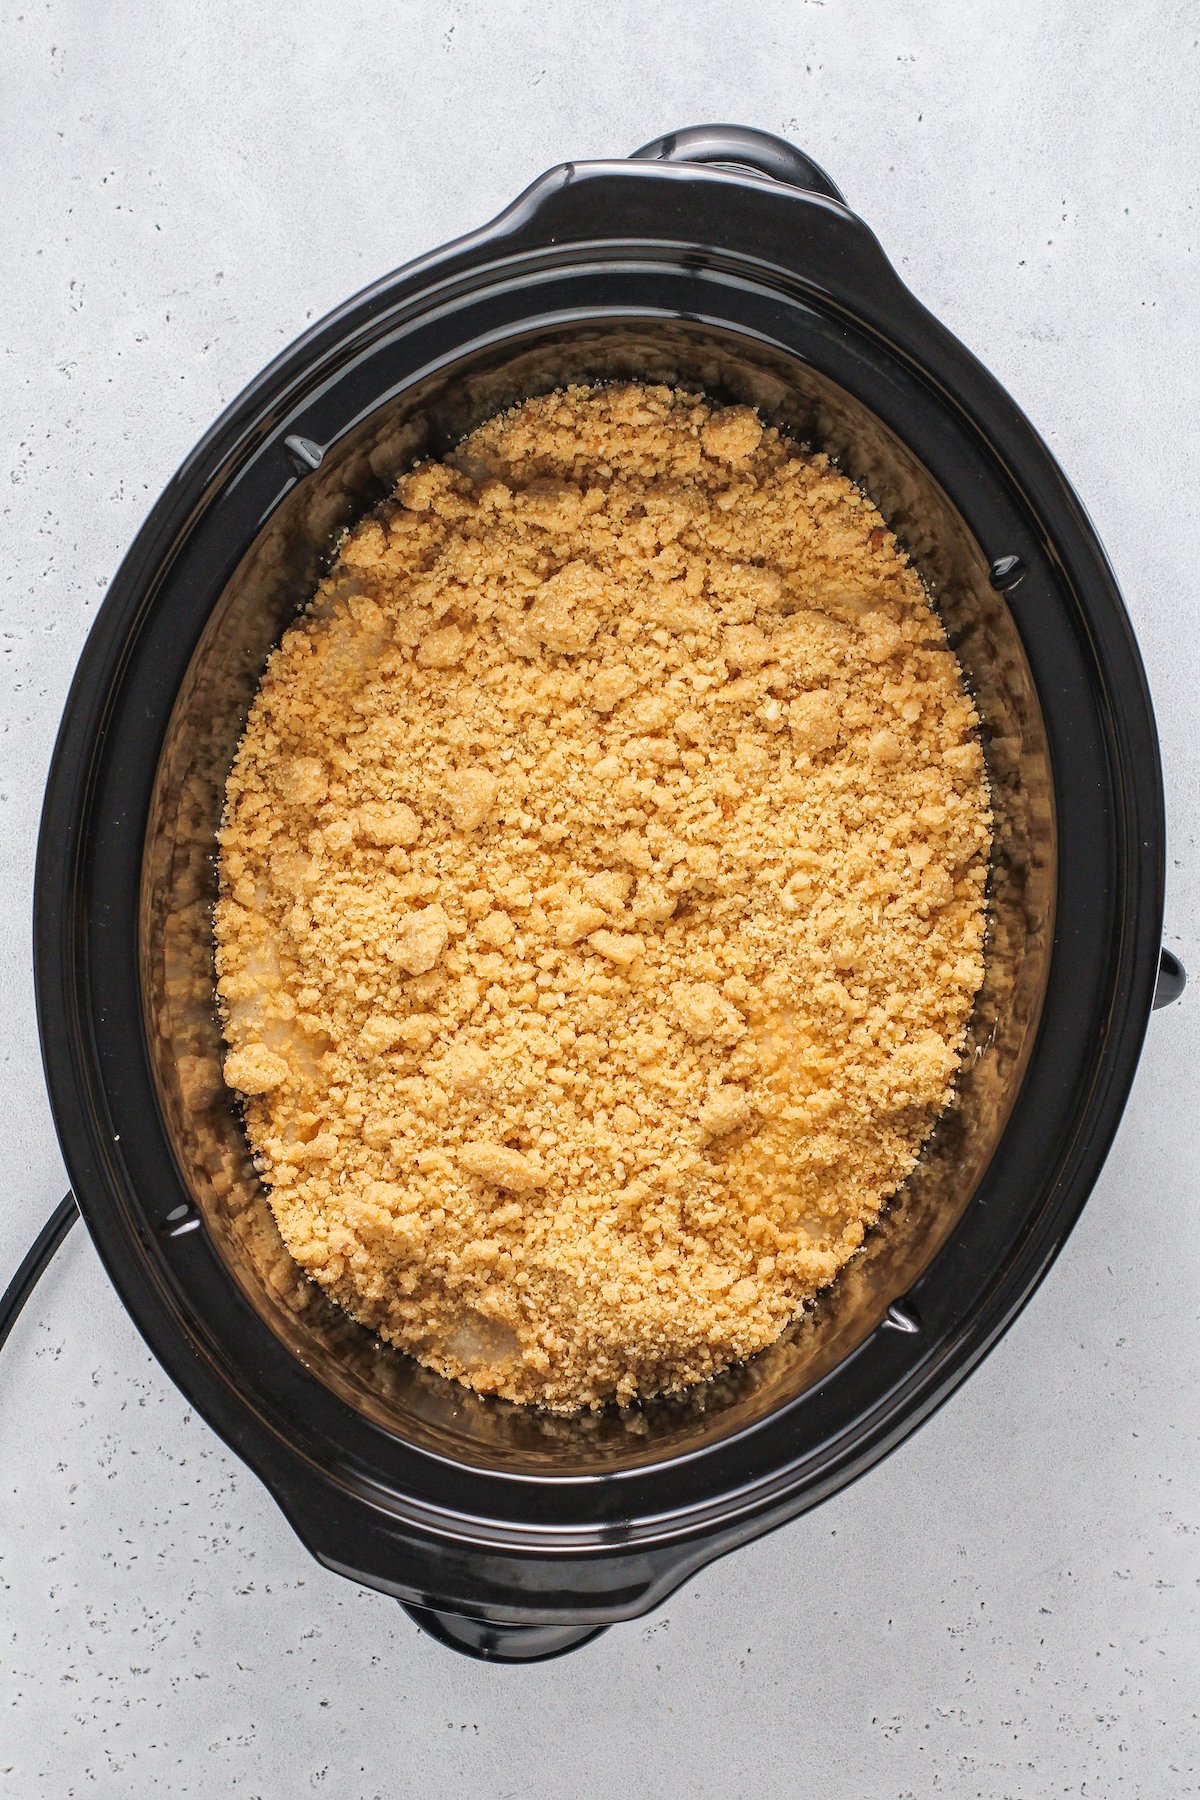 Crockpot filled with cobbler and brown sugar crumble topping.